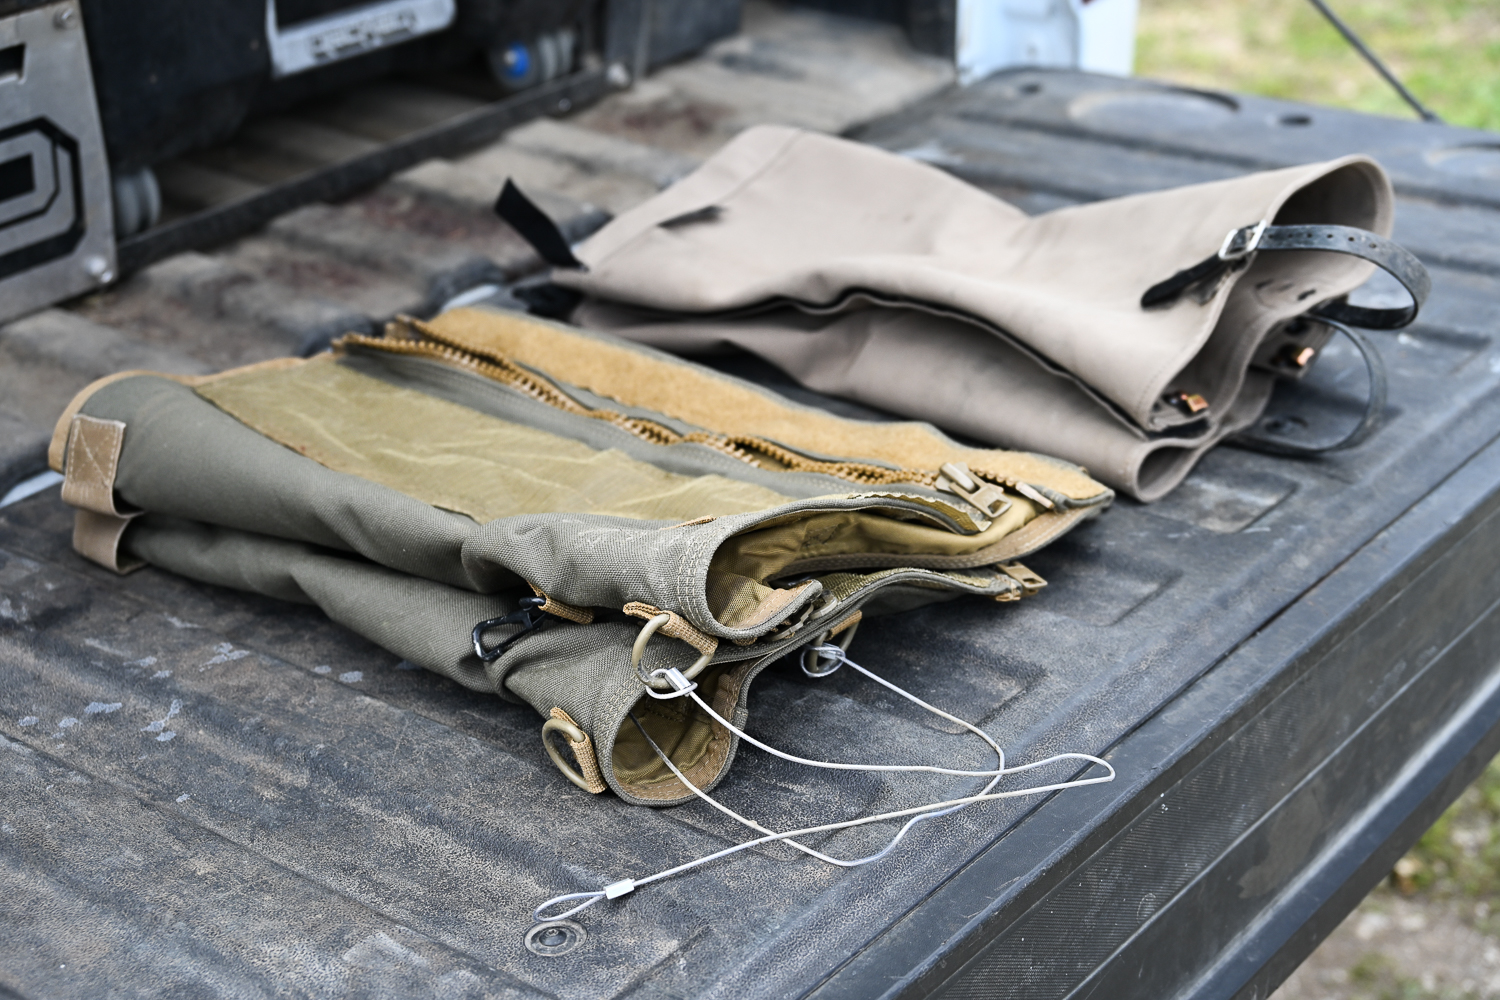 The author compared the T&K gaiters to a more traditional pair from King’s Camo.